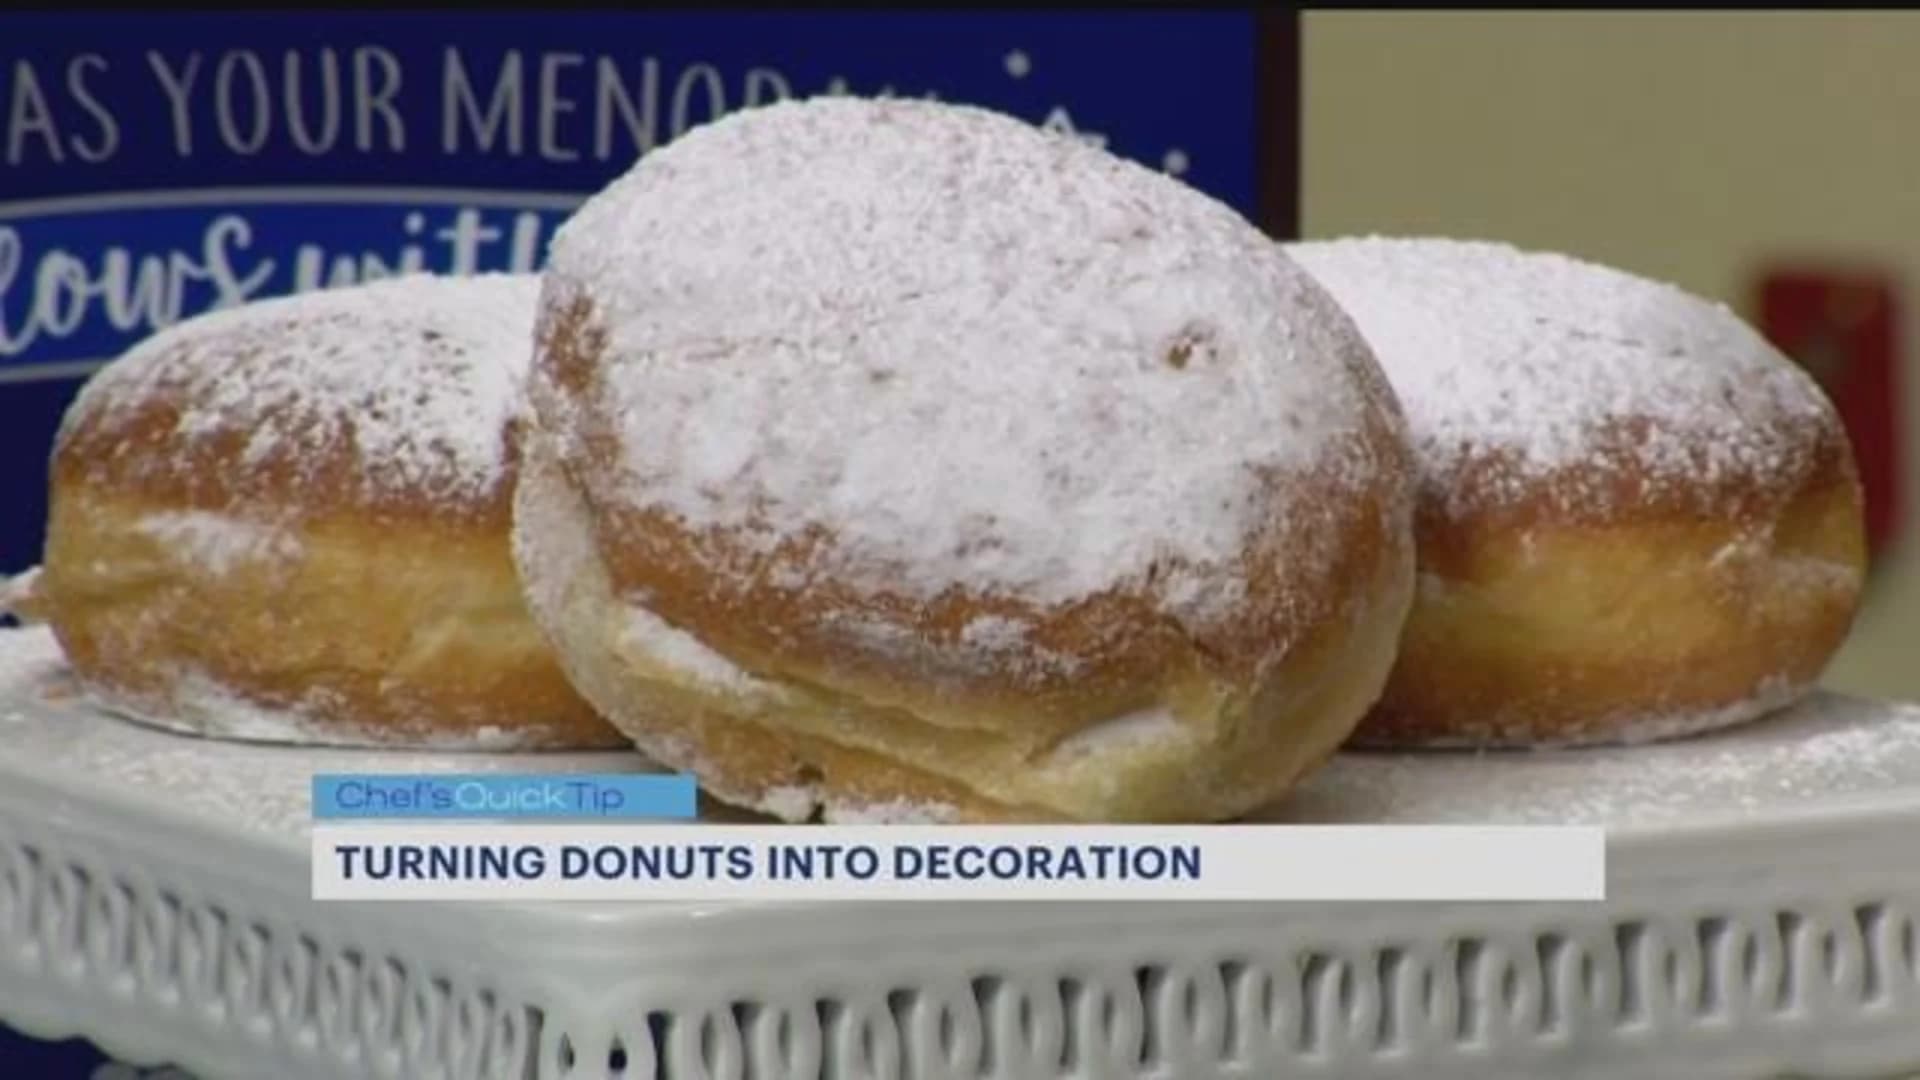 Chef's Quick Tip: Turning doughnuts into decorations